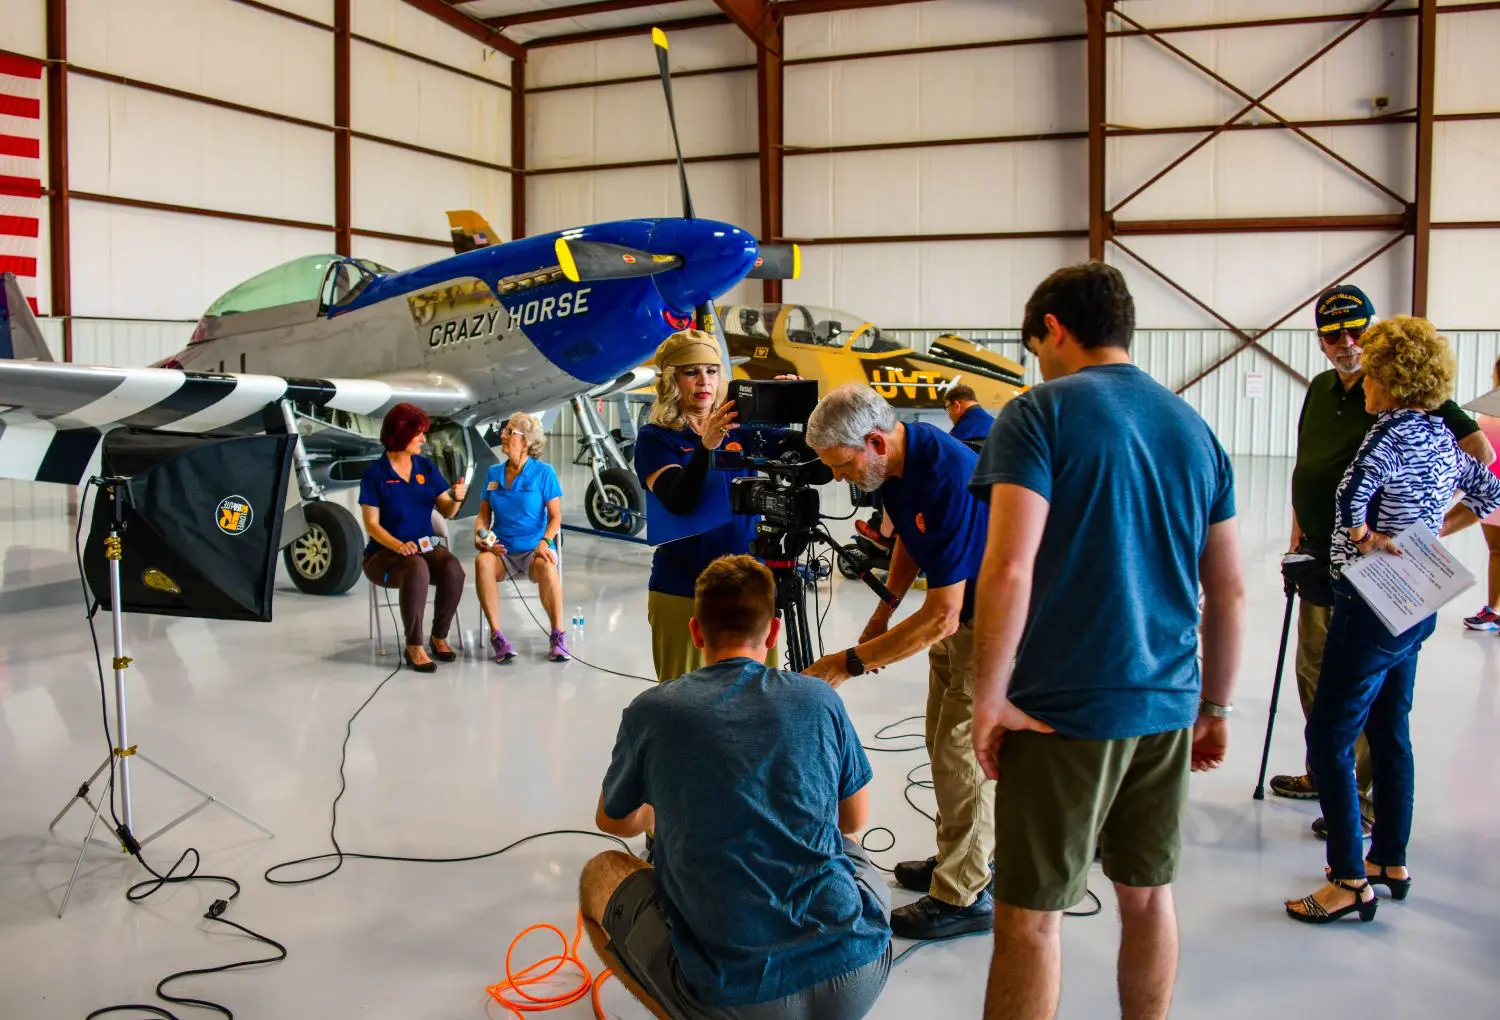 A group of people standing around in an airplane hangar.